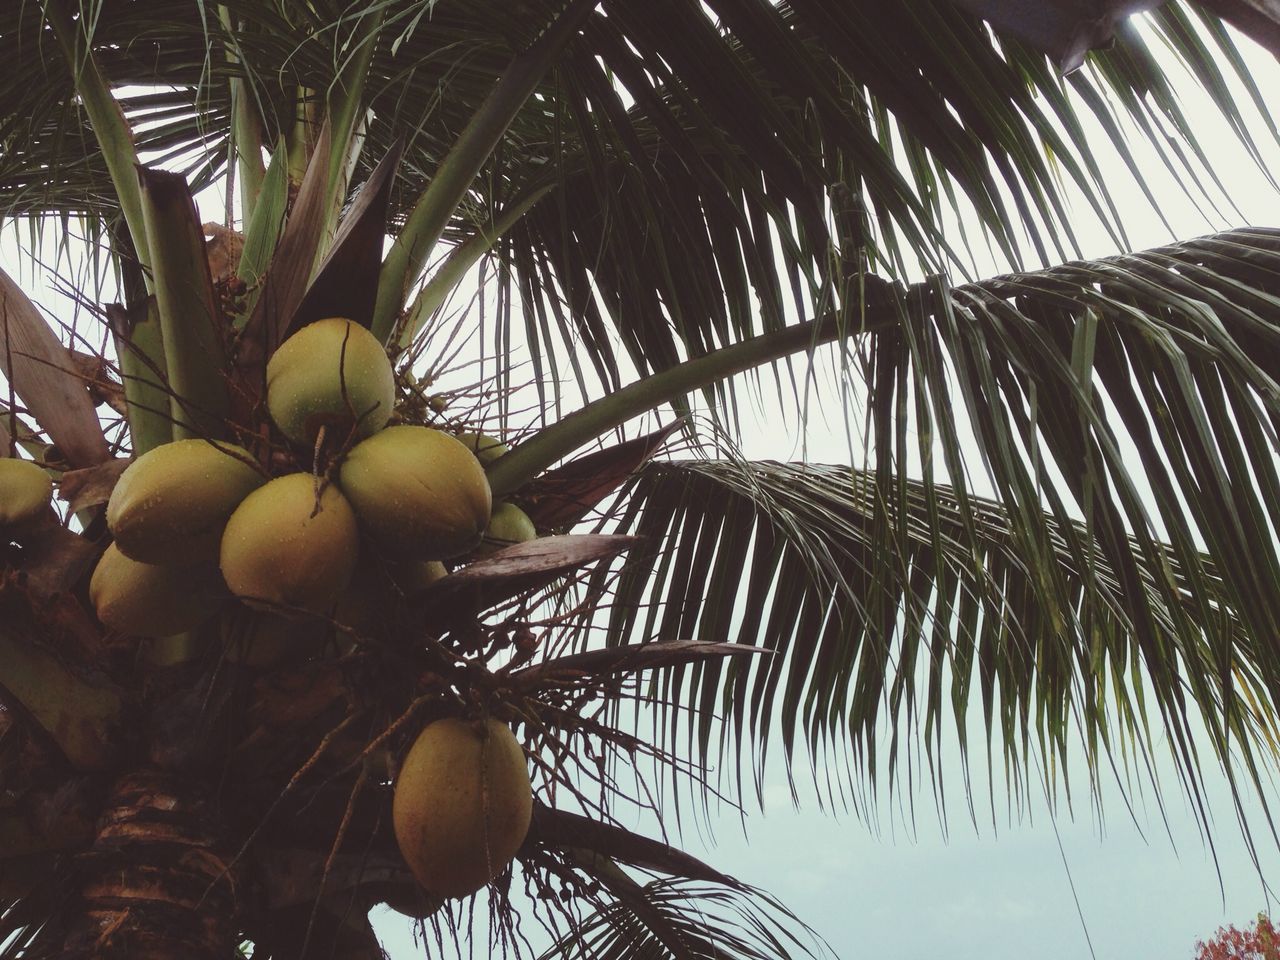 tree, palm tree, fruit, low angle view, branch, growth, food and drink, leaf, food, palm leaf, nature, healthy eating, day, no people, sunlight, outdoors, hanging, sky, tree trunk, close-up